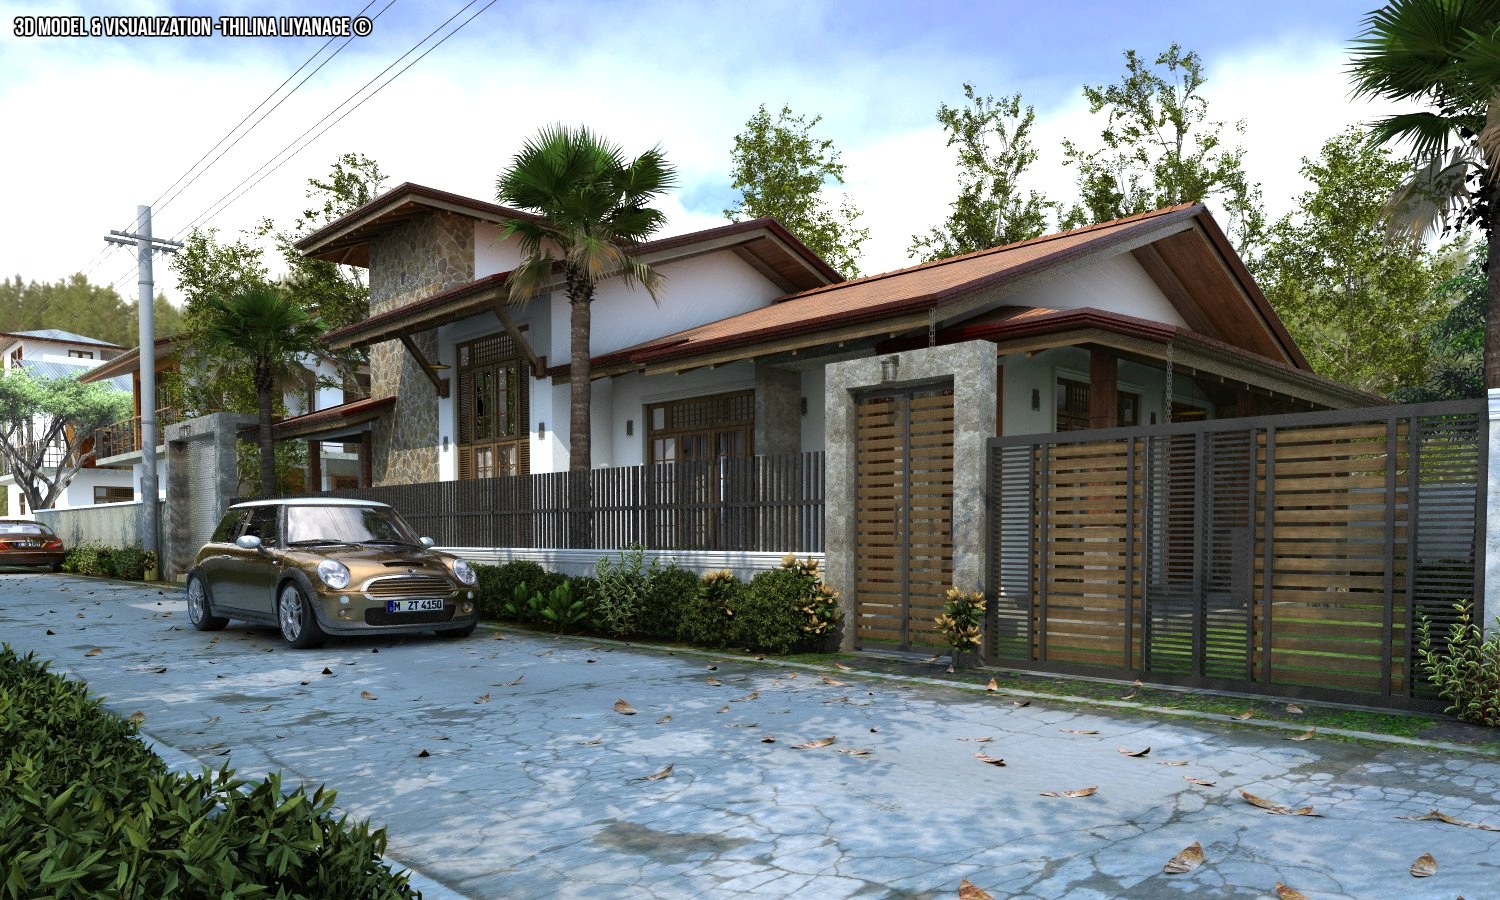 vray render by Thilina Liyanage